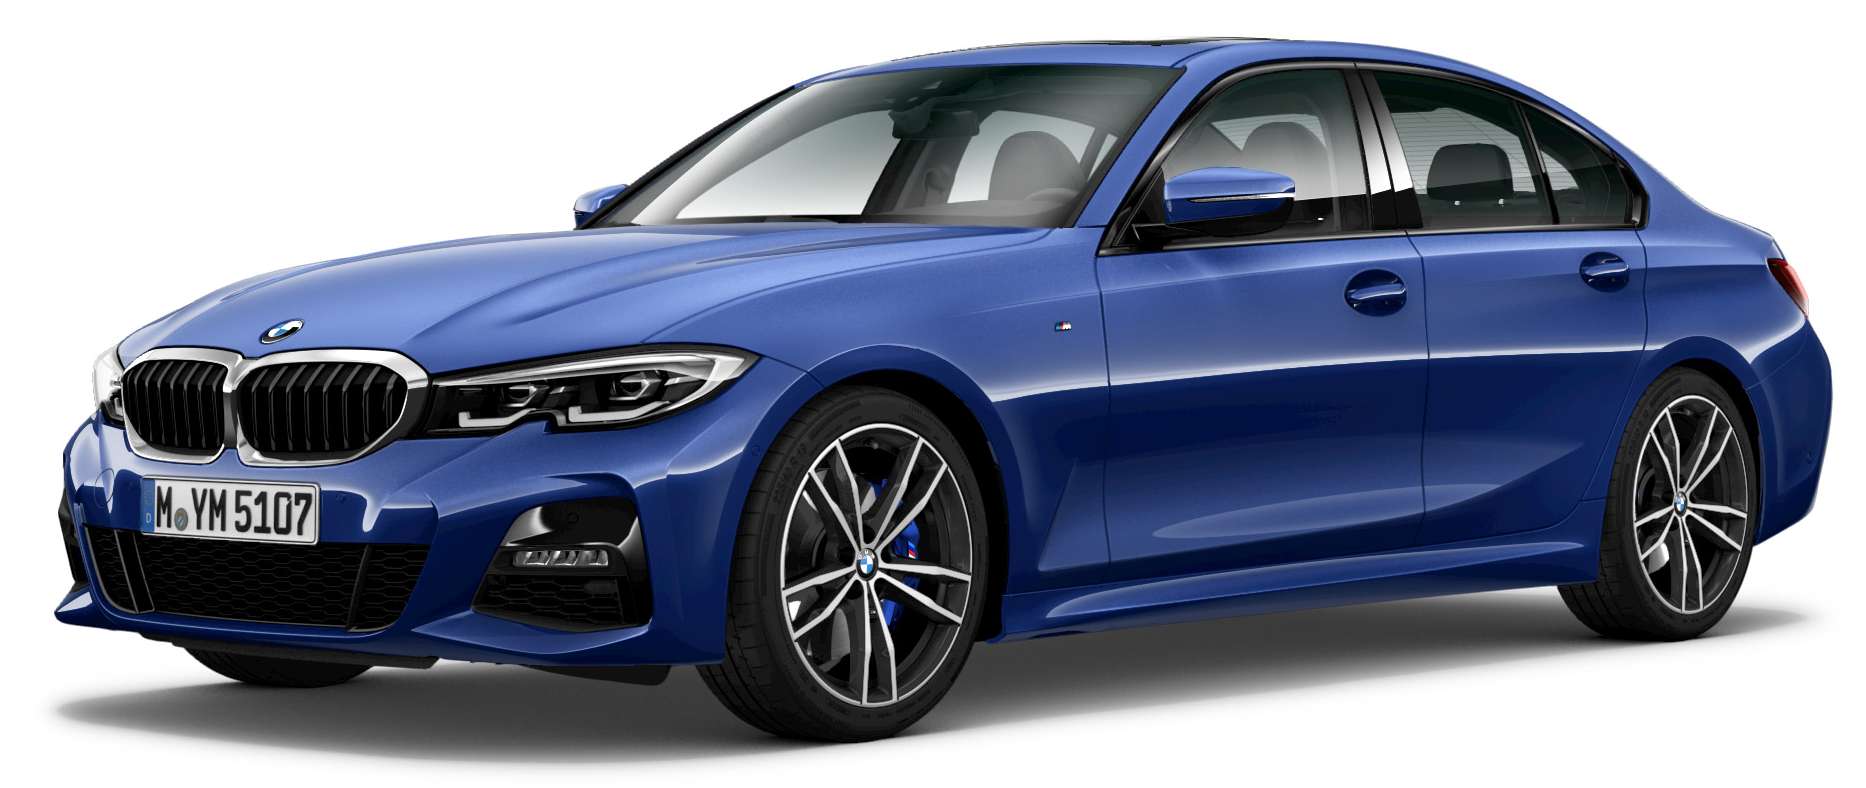 2022 G20 Bmw 330i M Sport Edition Malaysia Launch Official 1 Paul Tan